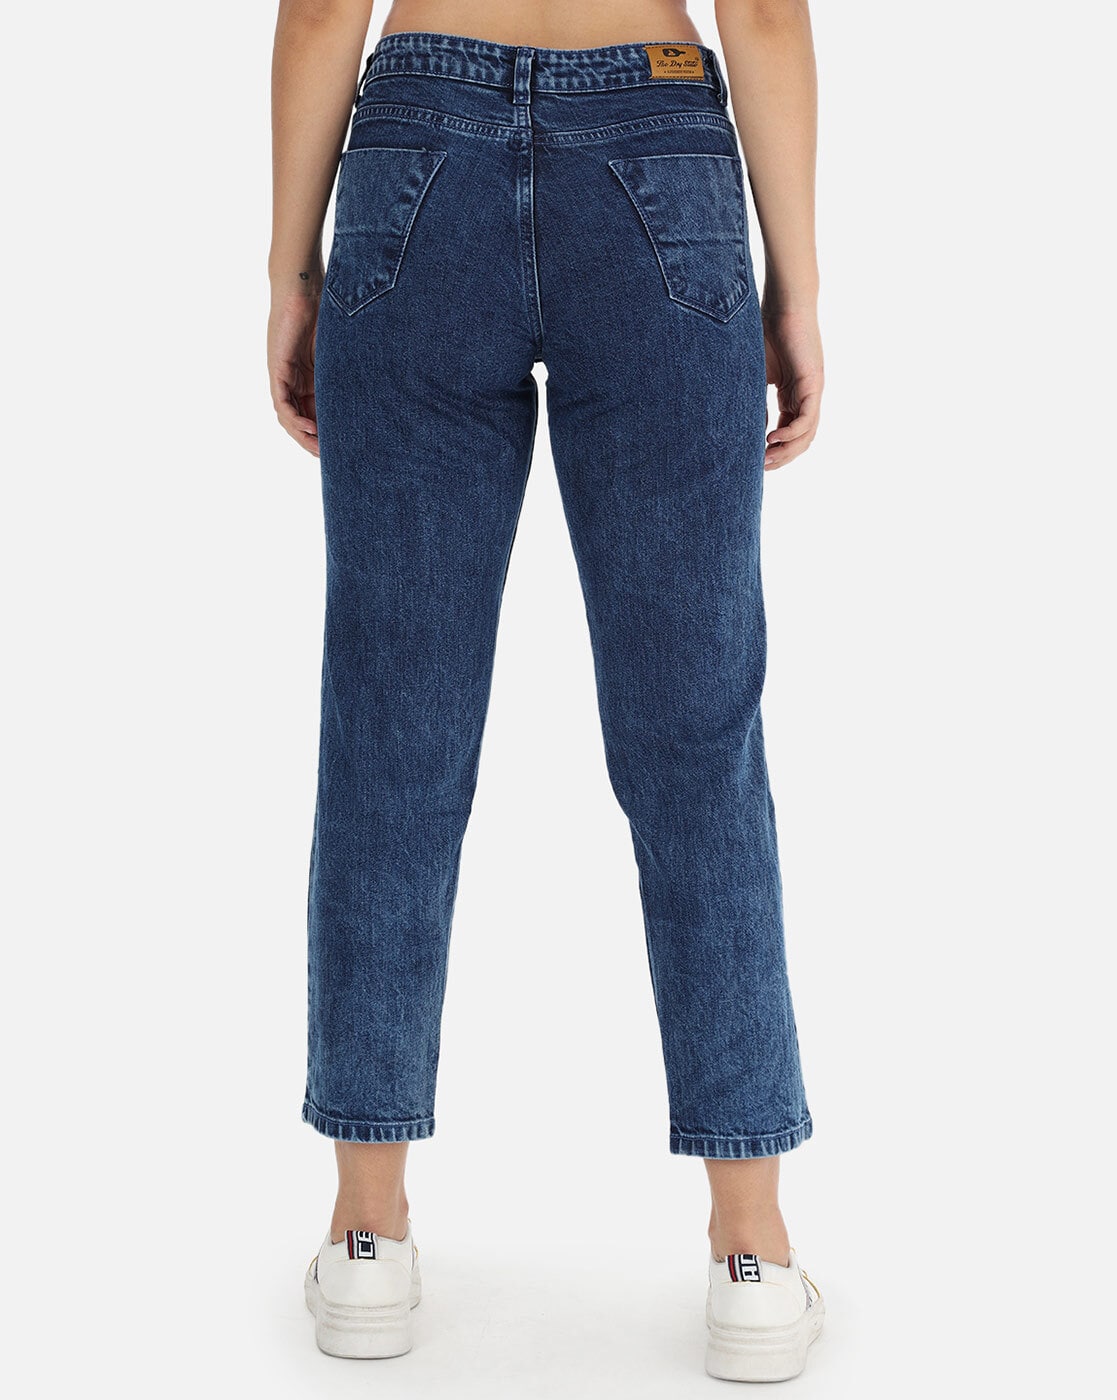 Buy Blue Jeans & Jeggings for Women by The Dry State Online